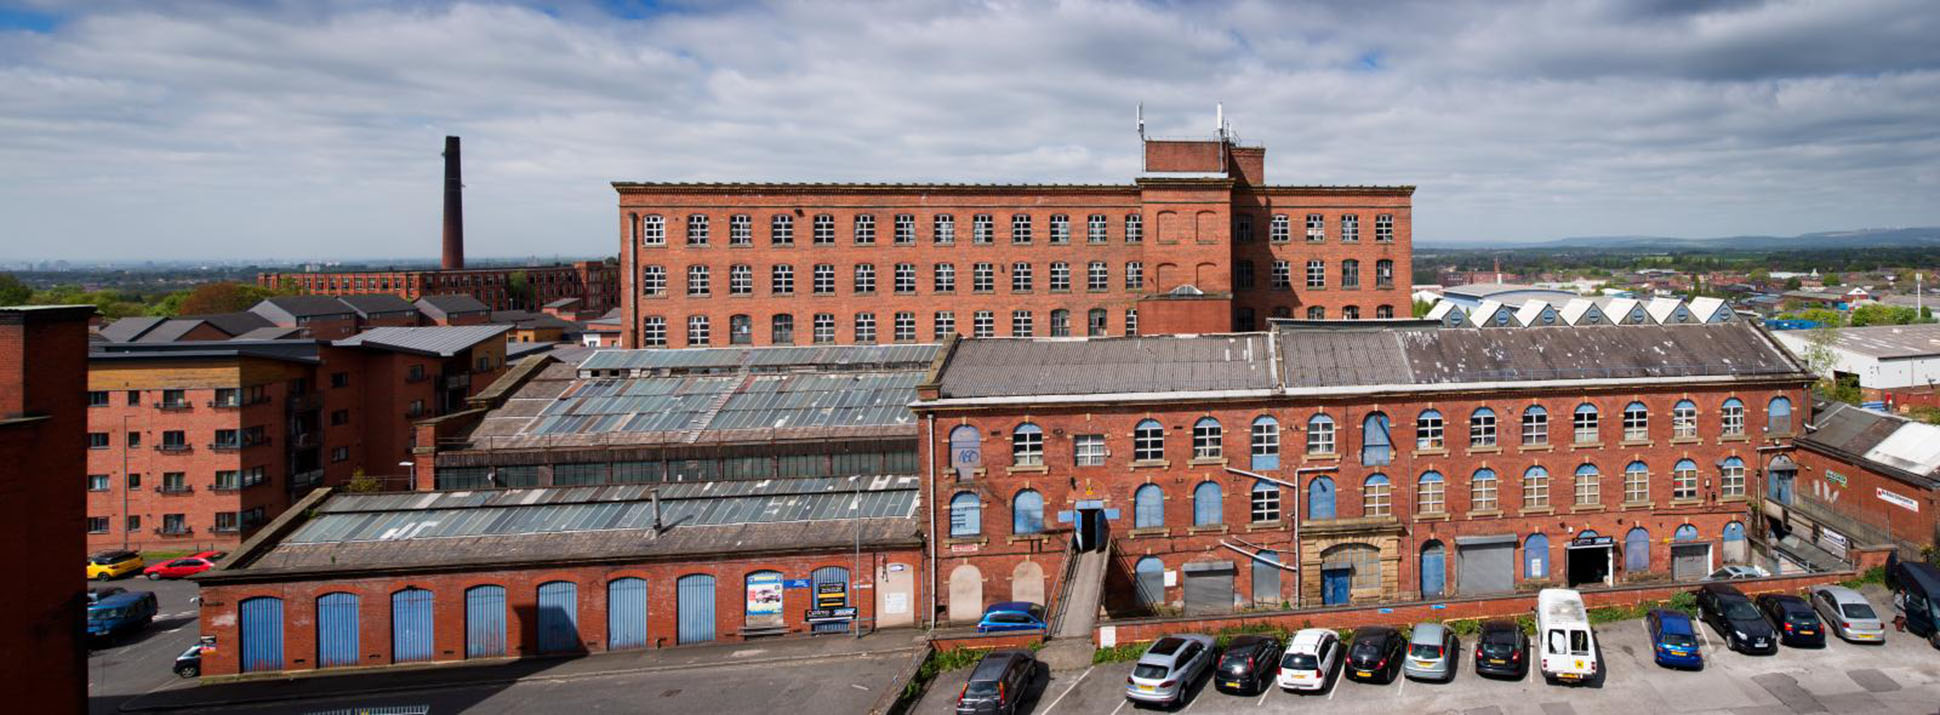 Mill complex at Hartford Works, Oldham, Greater Manchester